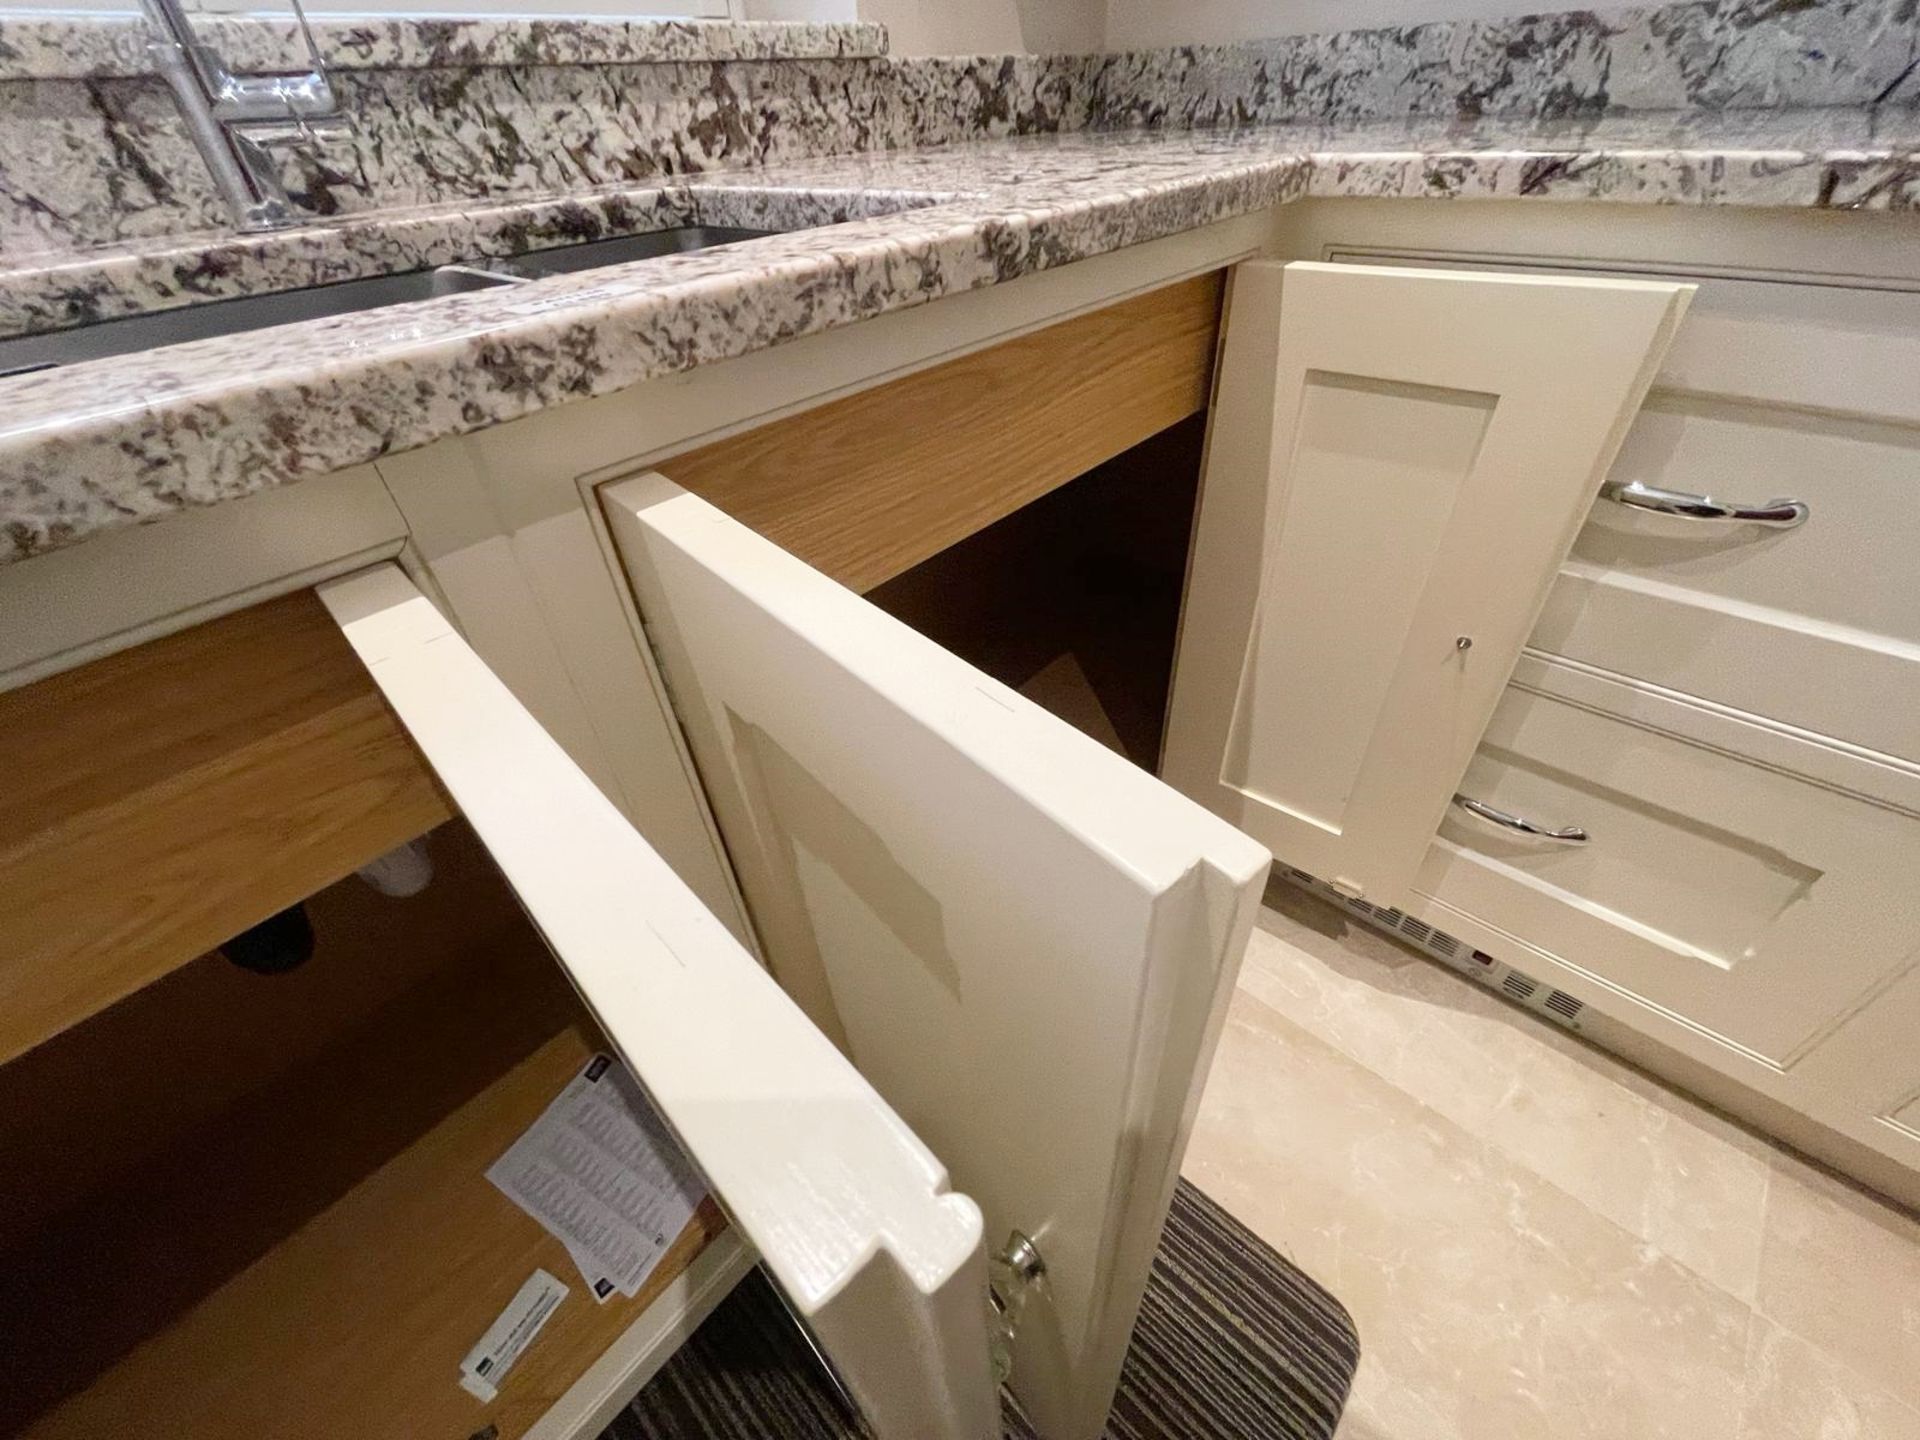 1 x Bespoke Fitted Solid Wood Kitchen with Natural Bianco Antico Grantite Work Surfaces - Image 44 of 61